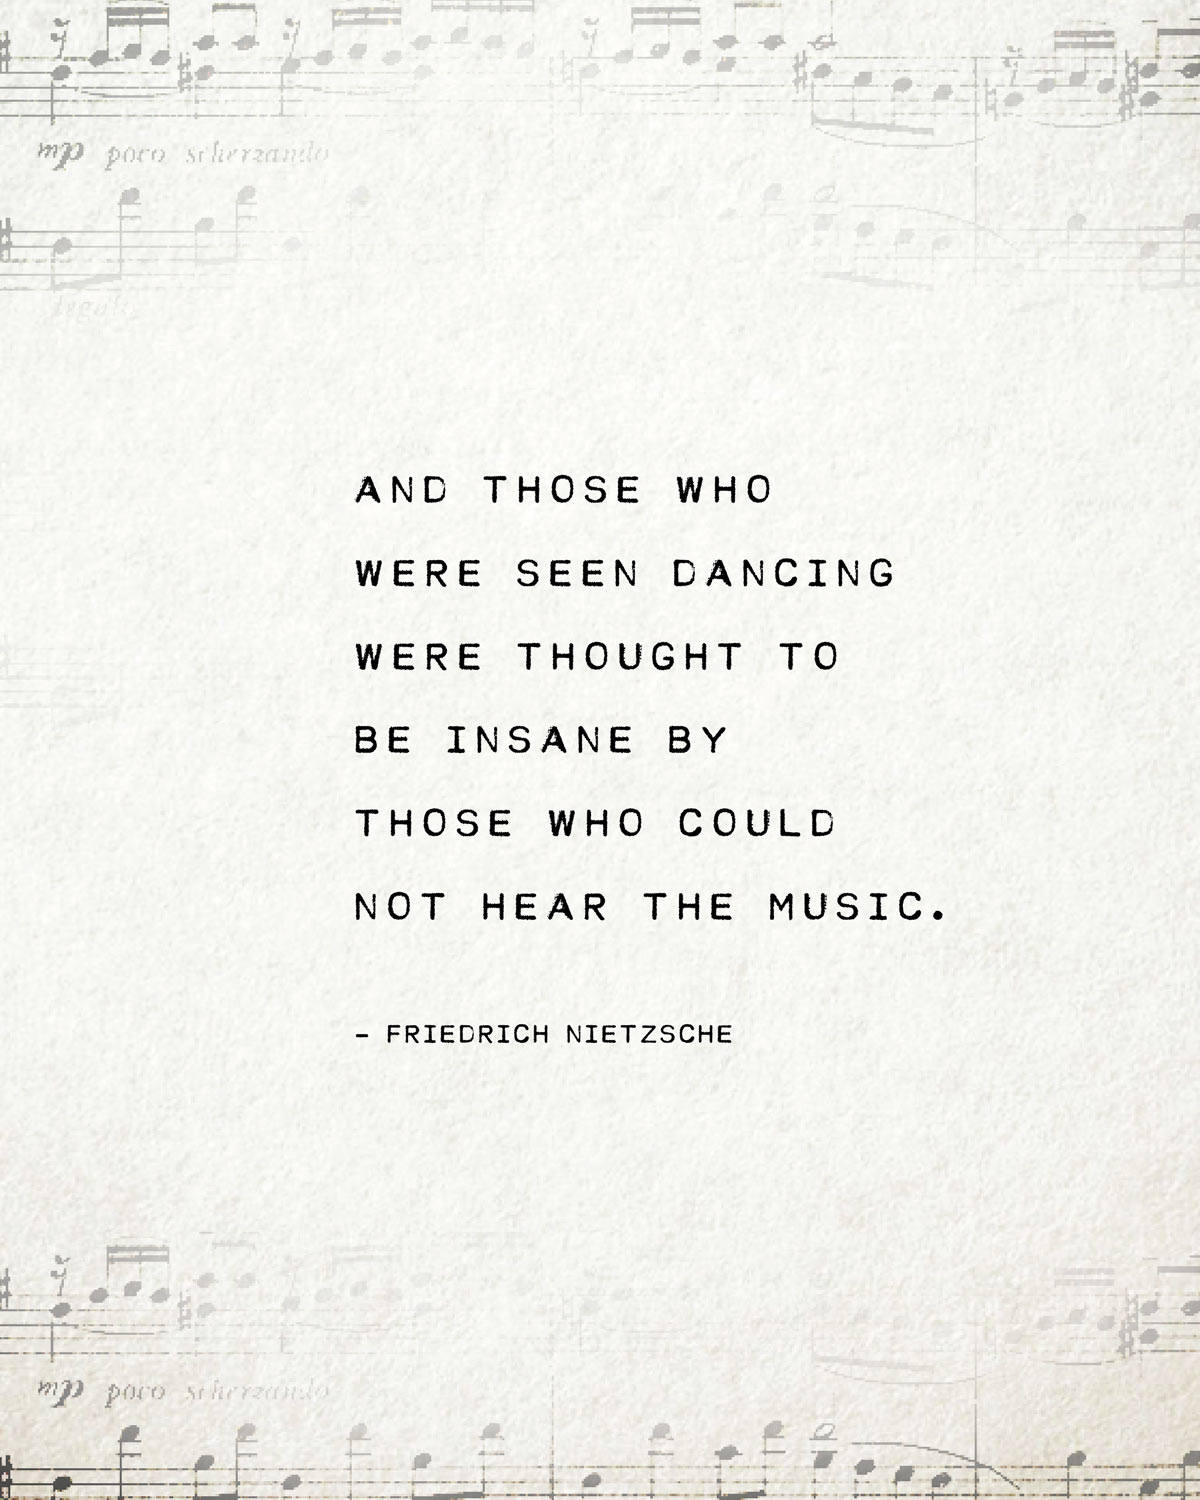 Friedrich Nietzsche quote print "and those who were and those who were seen dancing..."